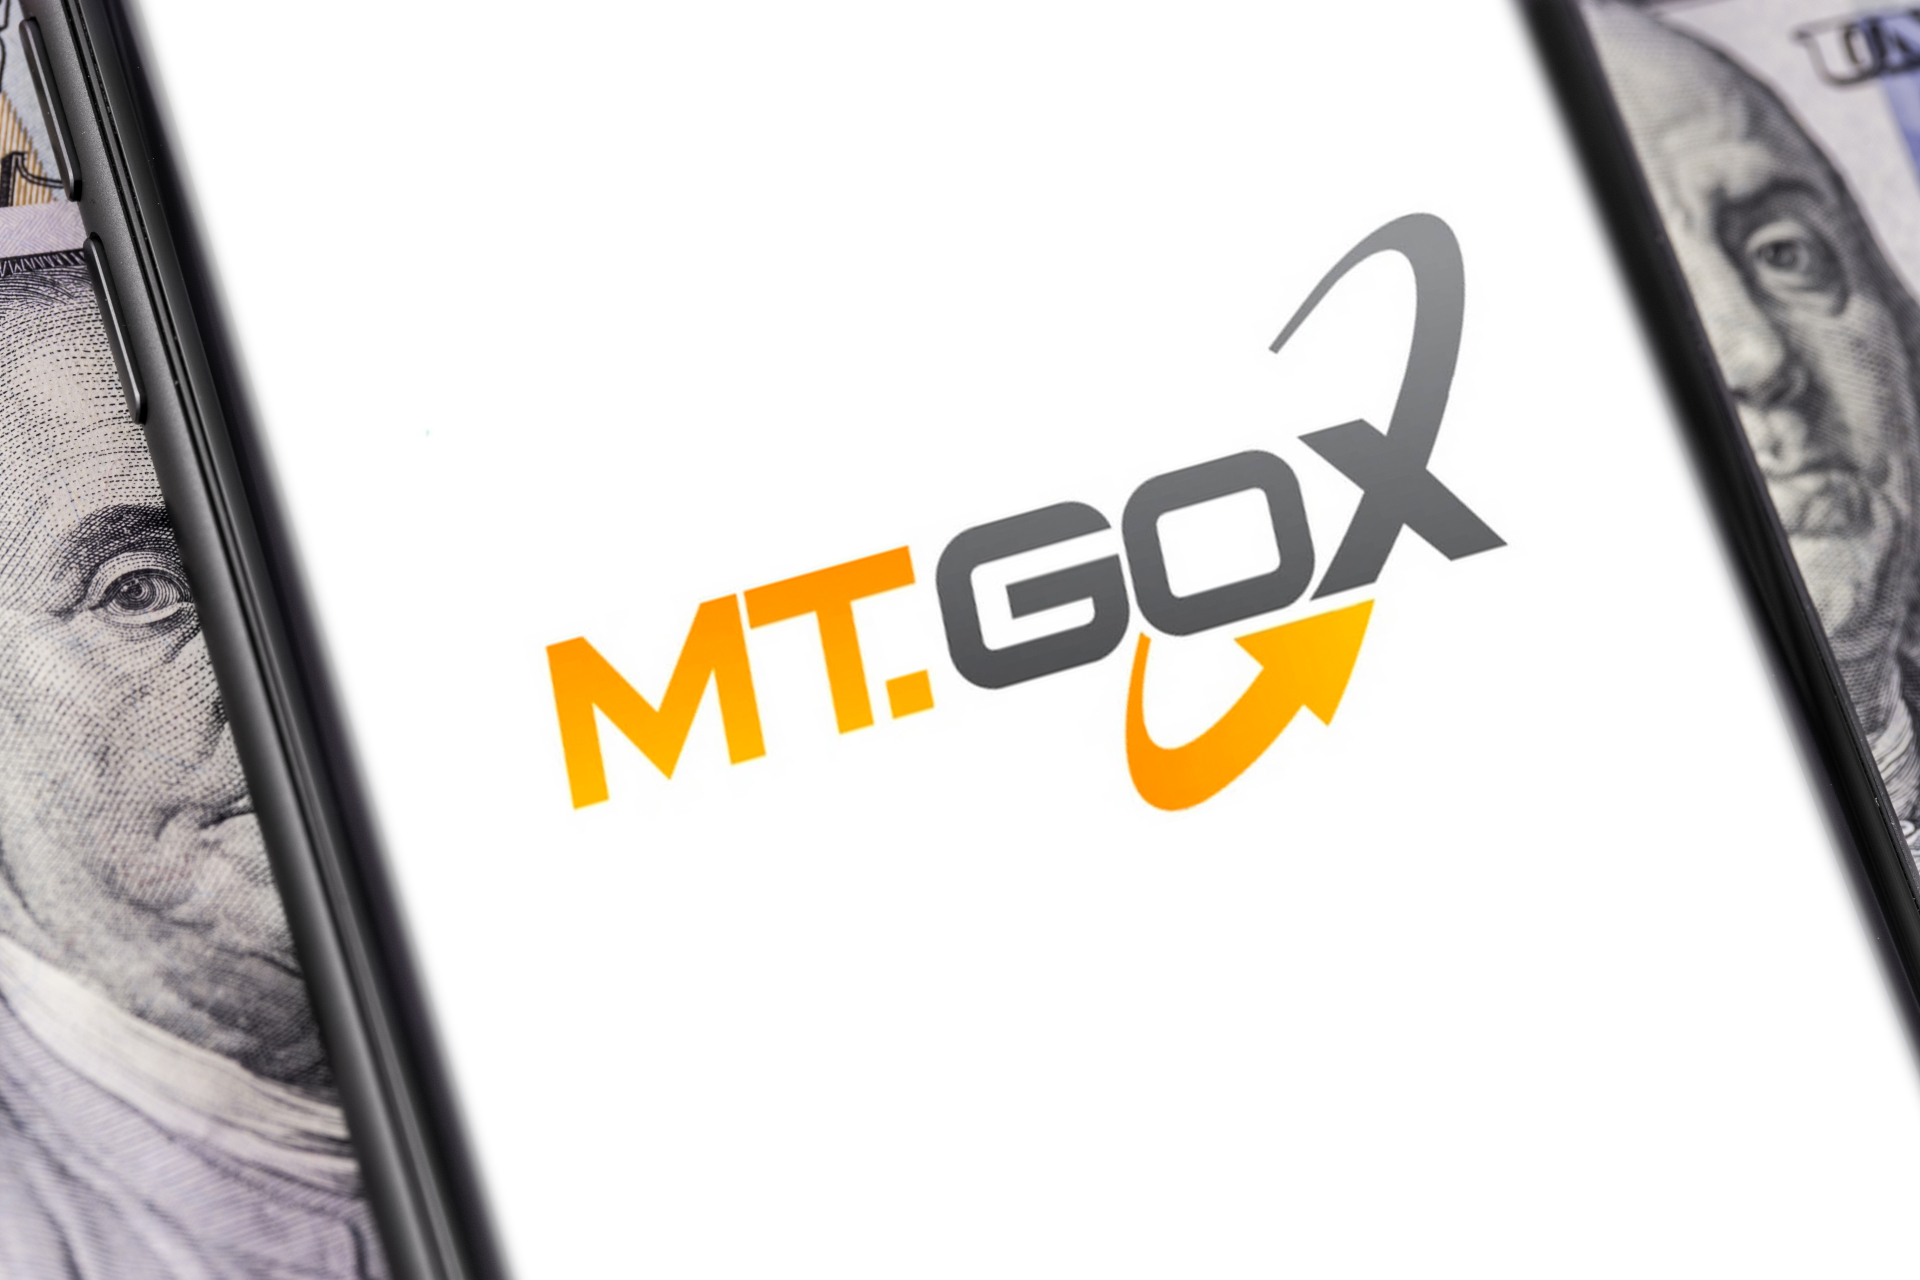 Largest Mt.Gox creditor gets his Bitcoin back after more than 9 years
